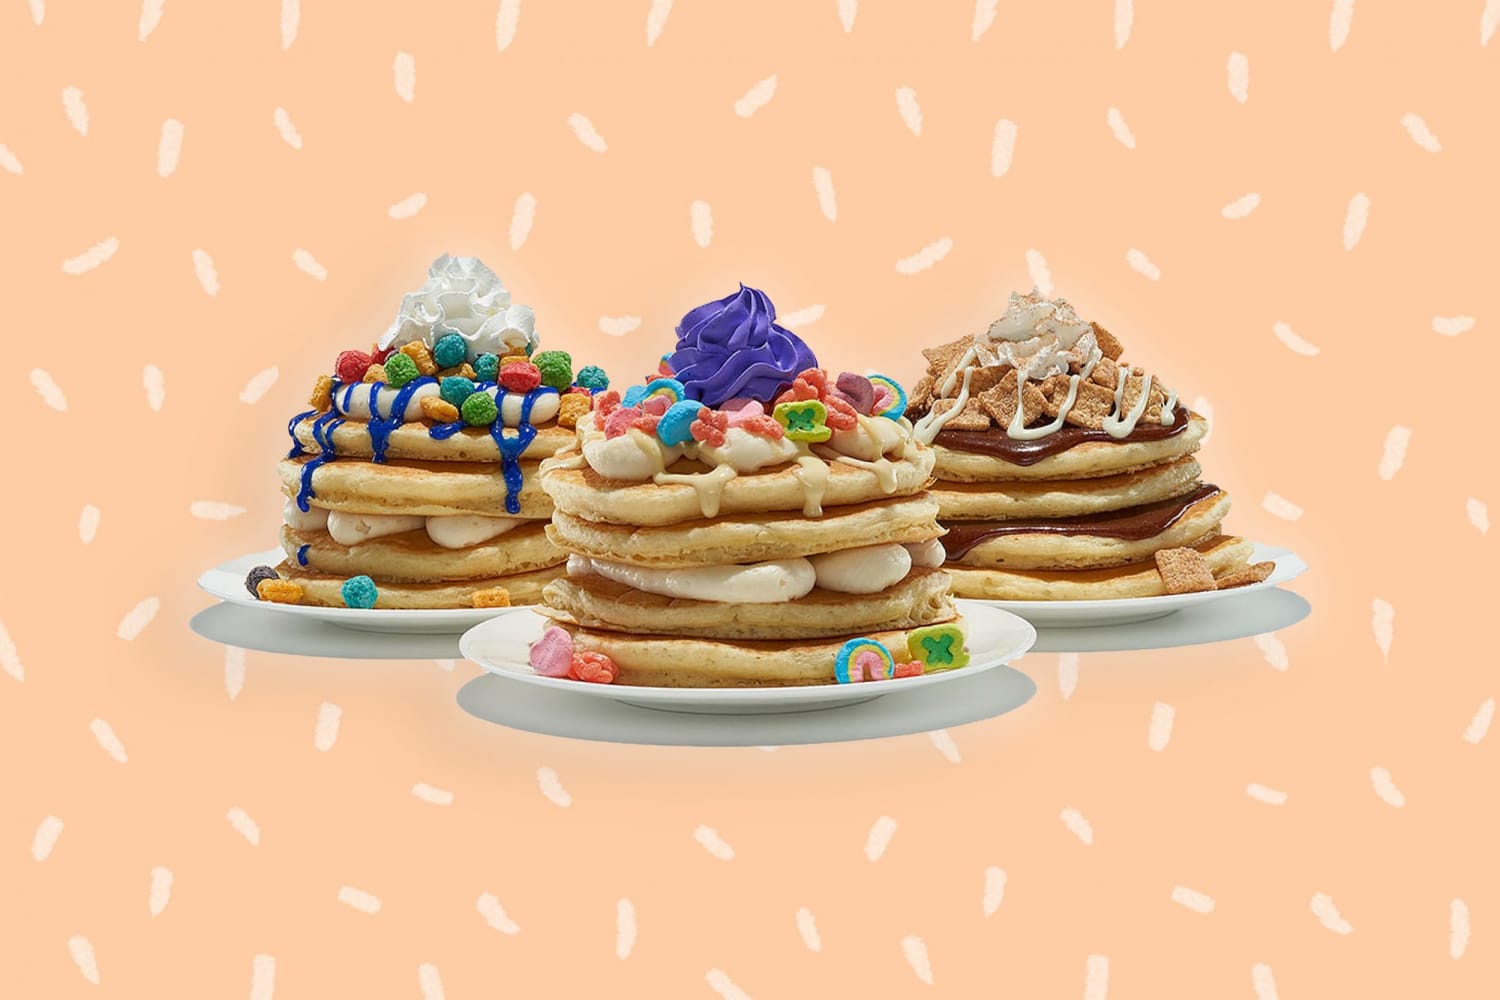 IHOP Releases Line of Sweet Cereal-Themed Pancakes